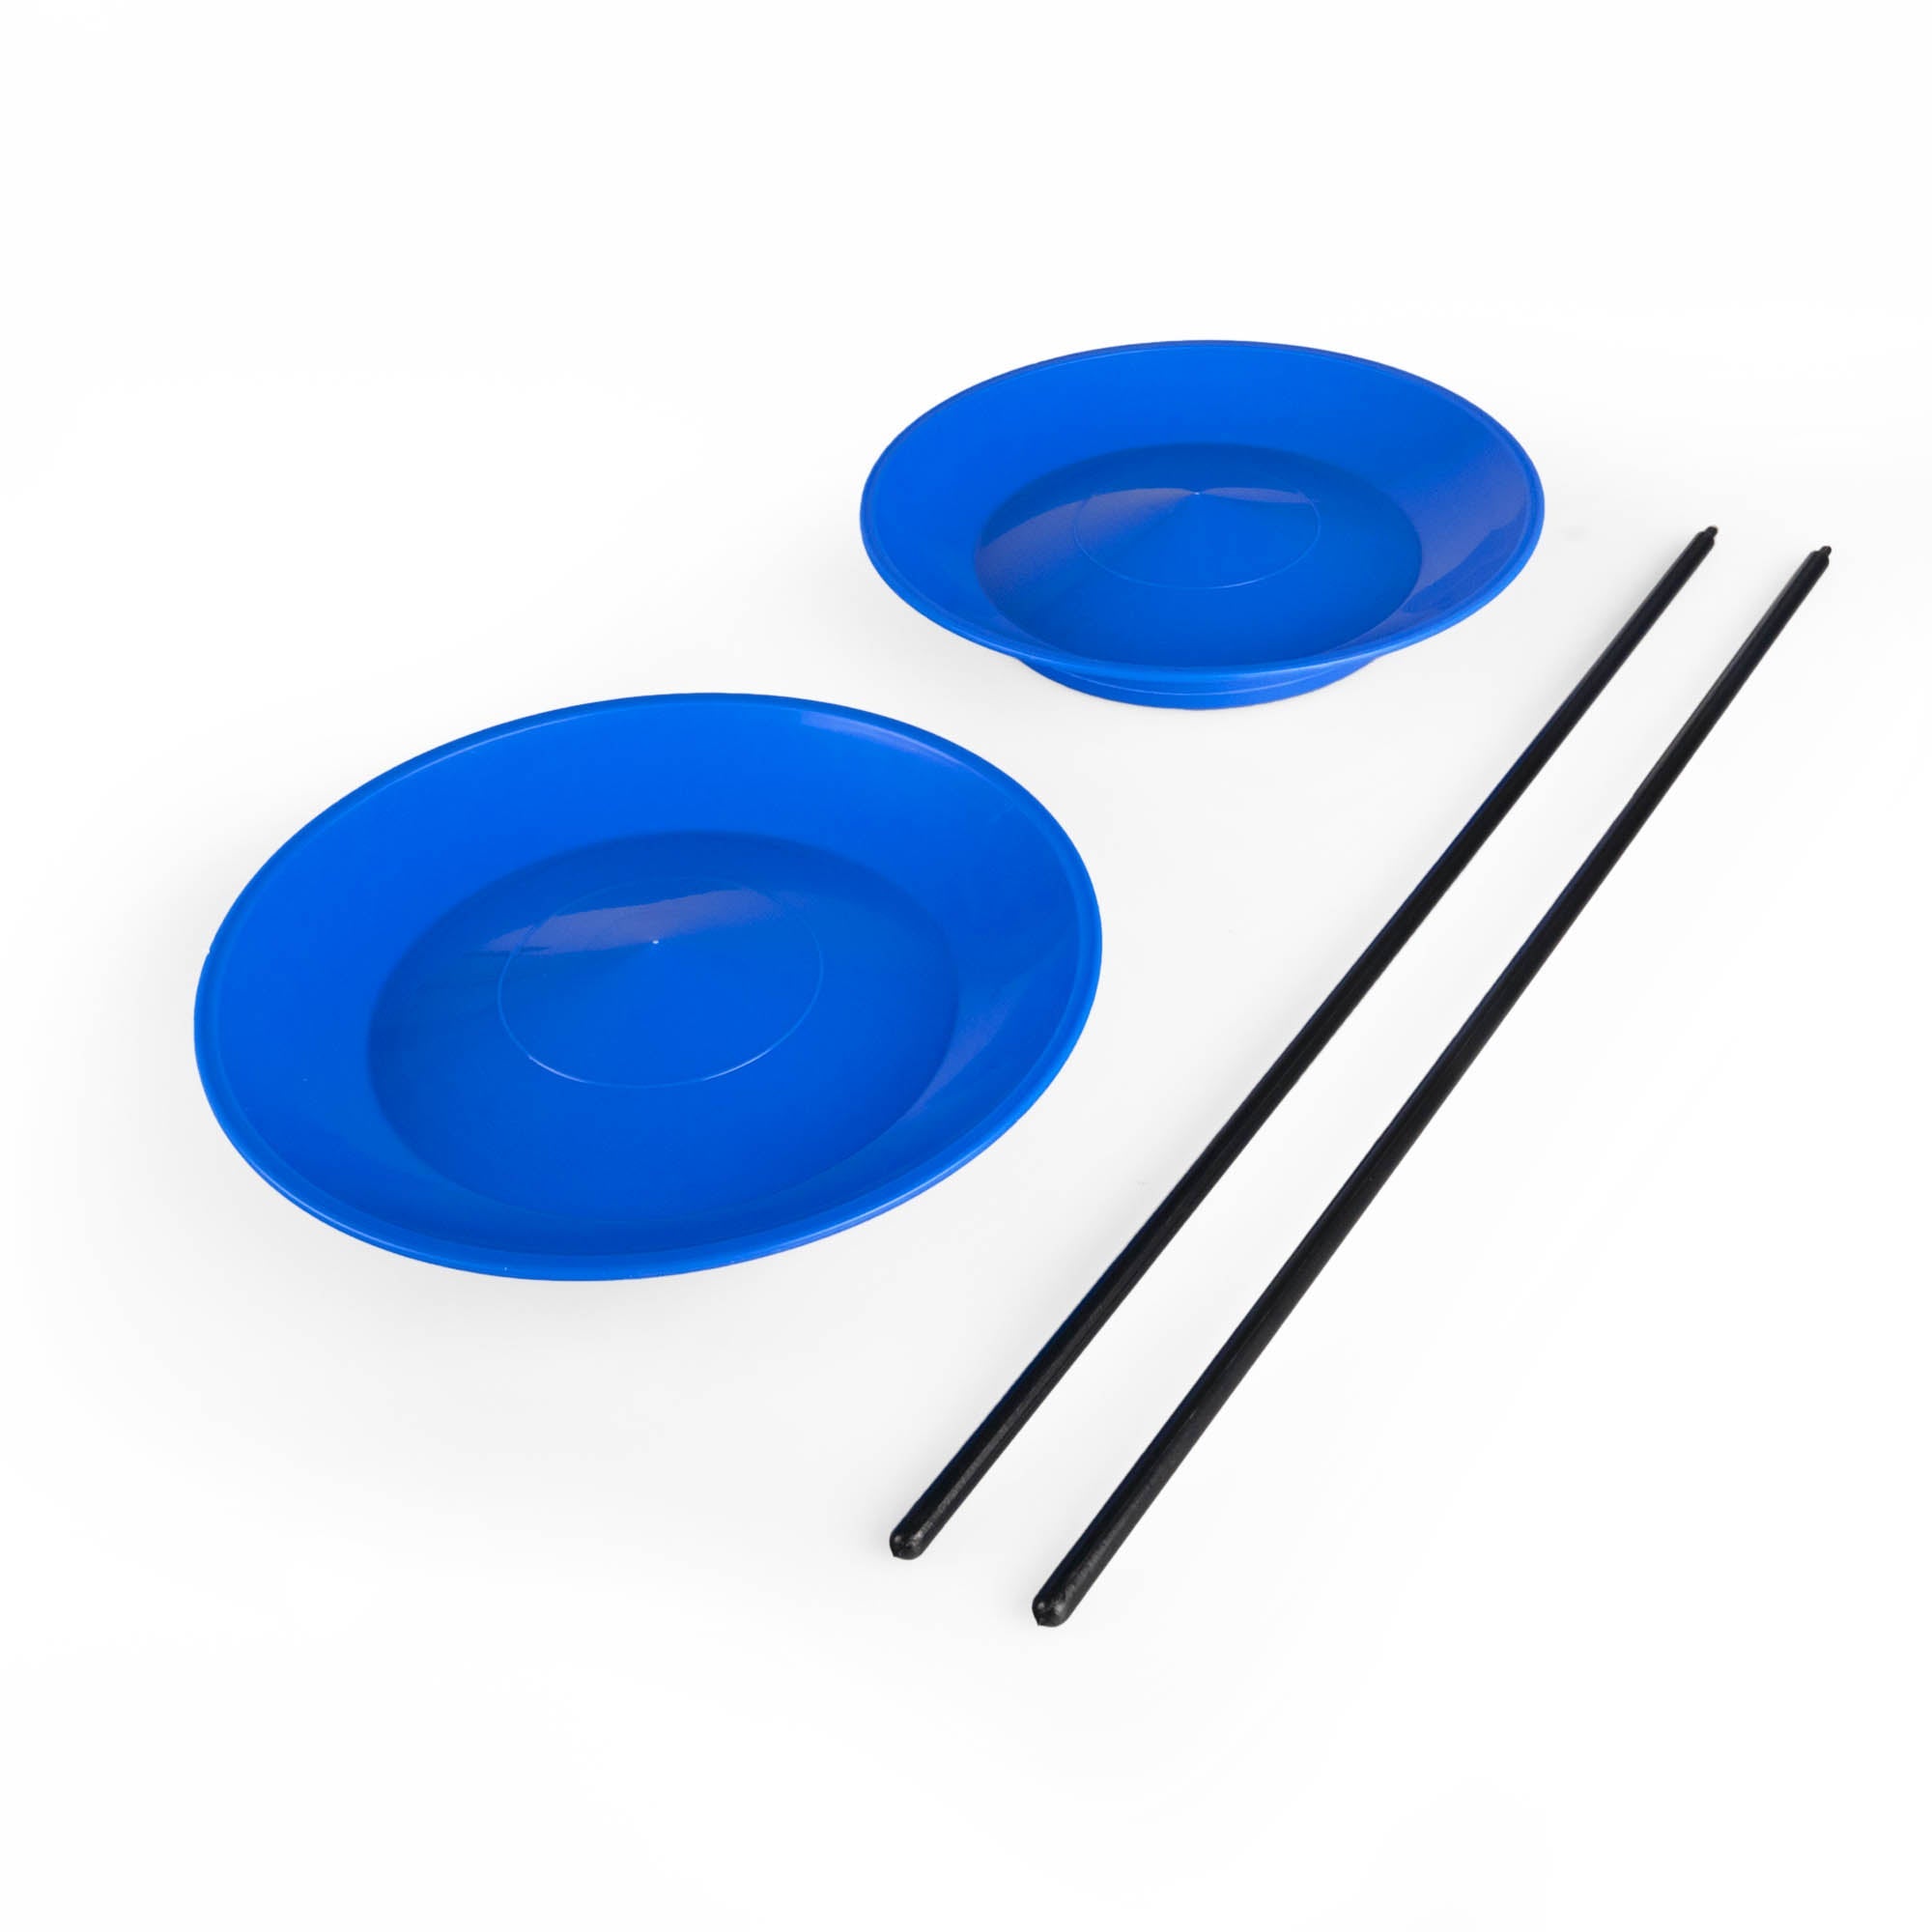 Status spinning plates 2 x blue with 2 sticks at a slight angle